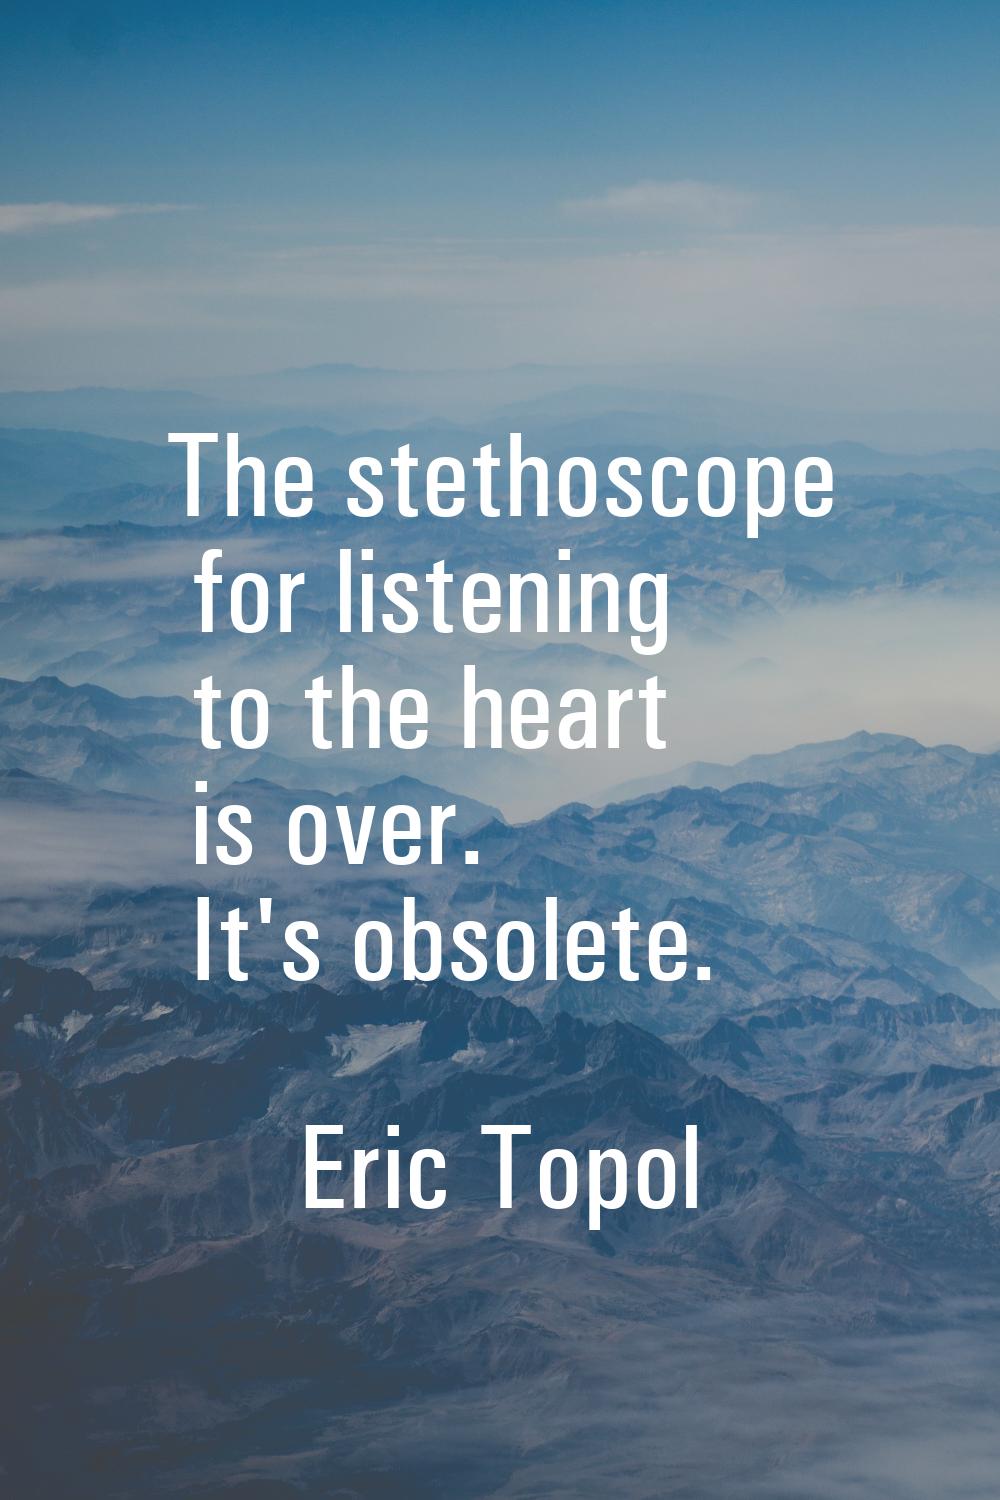 The stethoscope for listening to the heart is over. It's obsolete.